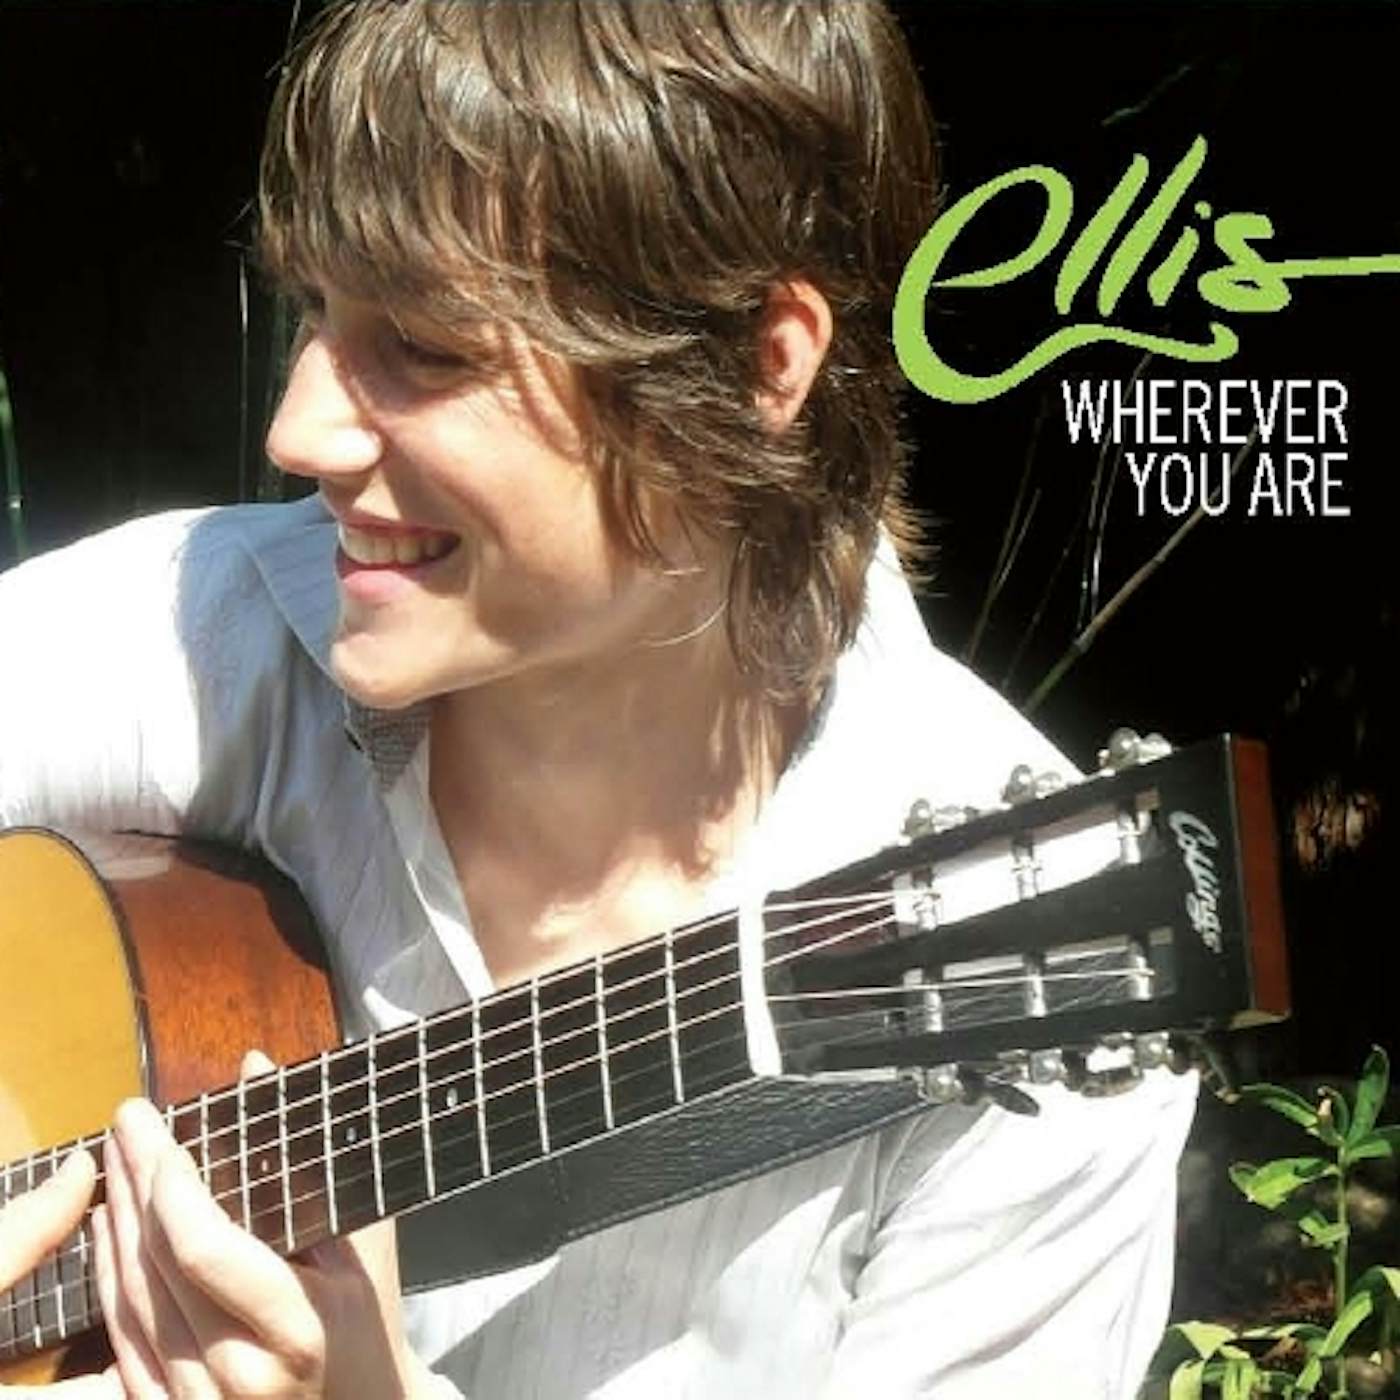 ellis WHEREVER YOU ARE (LIVE) CD